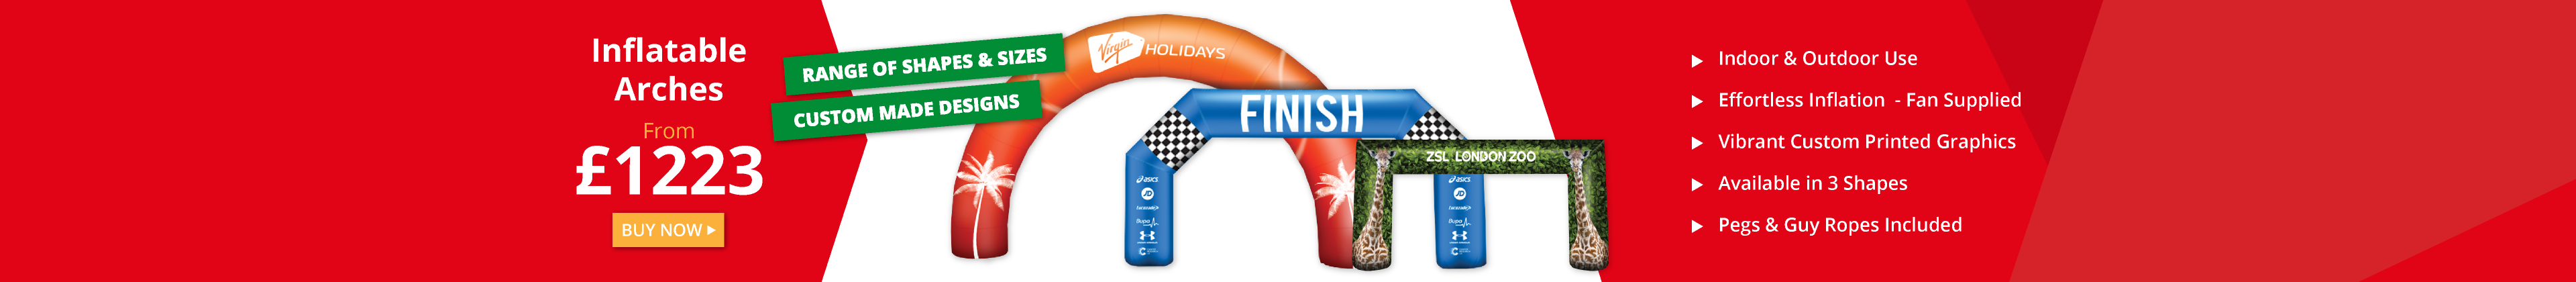 https://www.xldisplays.co.uk/categories/Inflatable-Structures-/Inflatable-Arches/